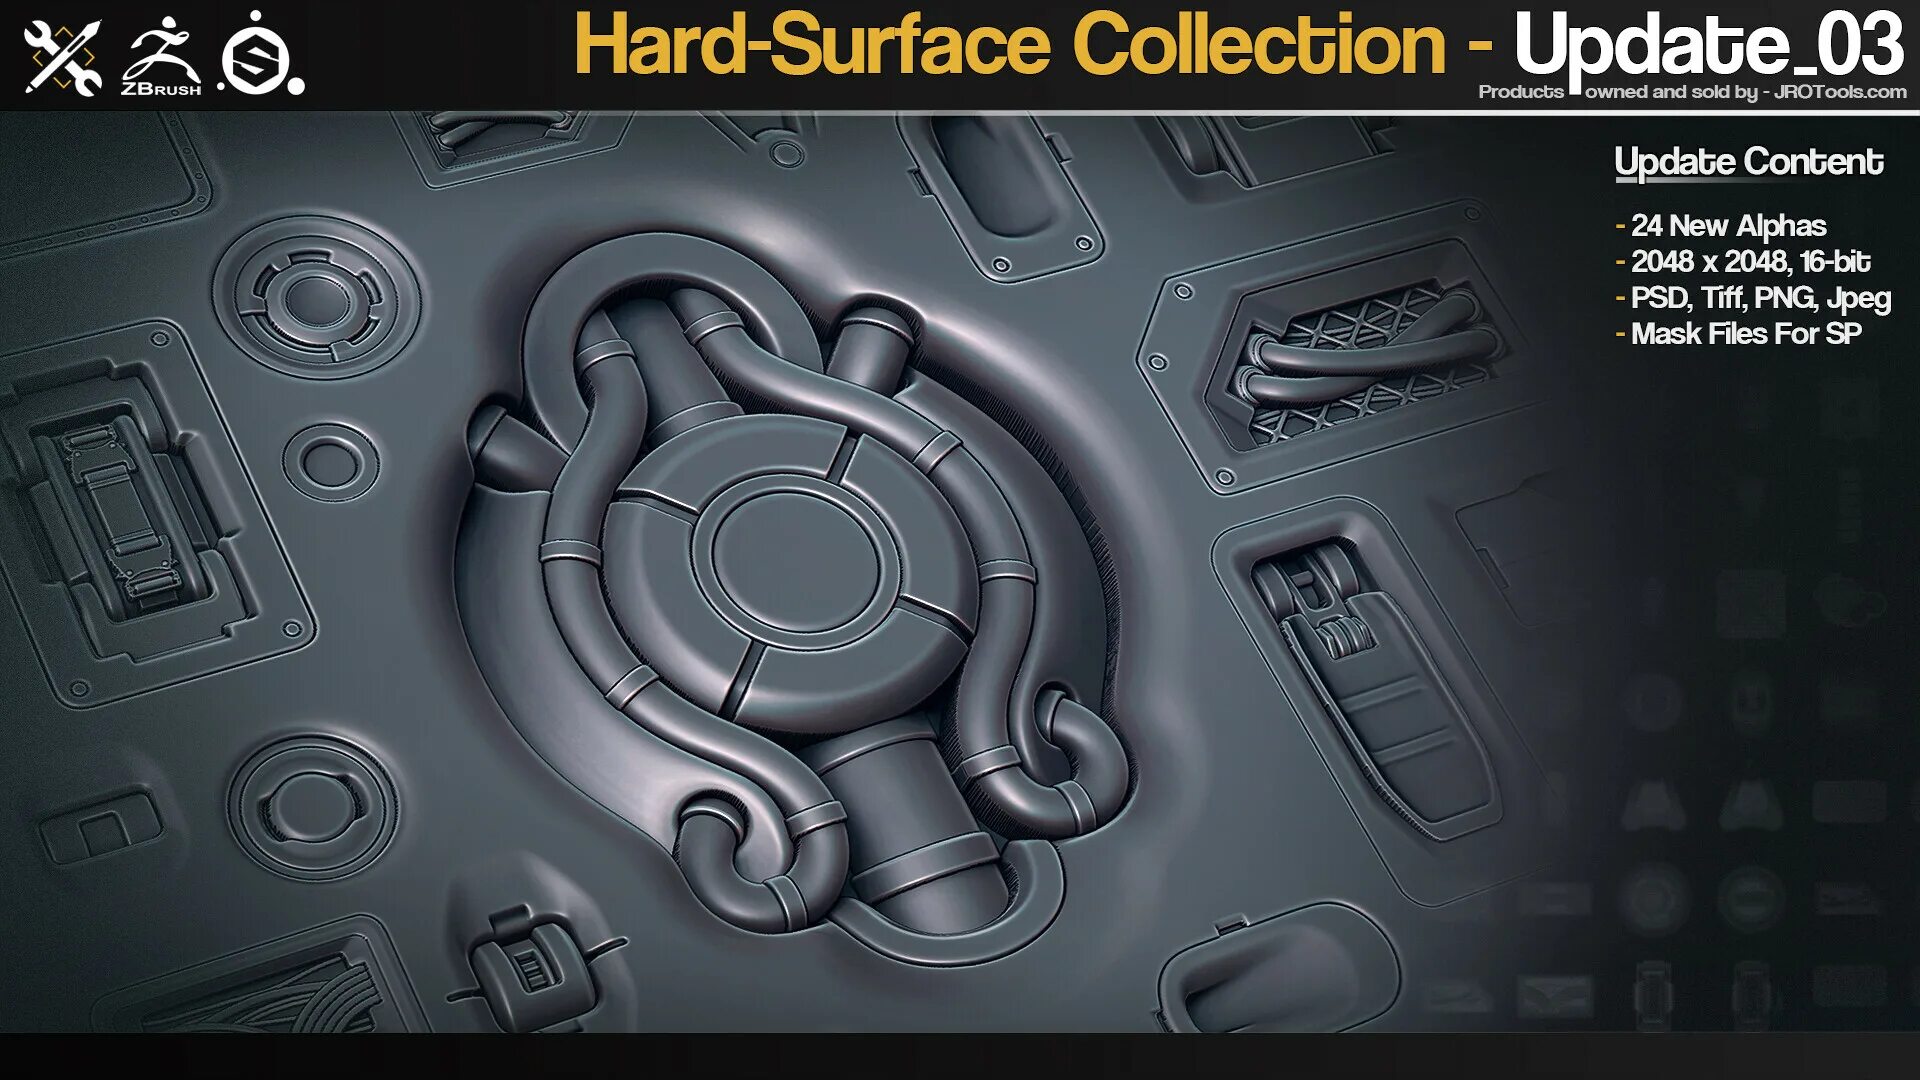 Zbrush hard surface. Hard surface 3d. Кисти для Zbrush hard surface. Hard surface Alphas Zbrush. Collection update